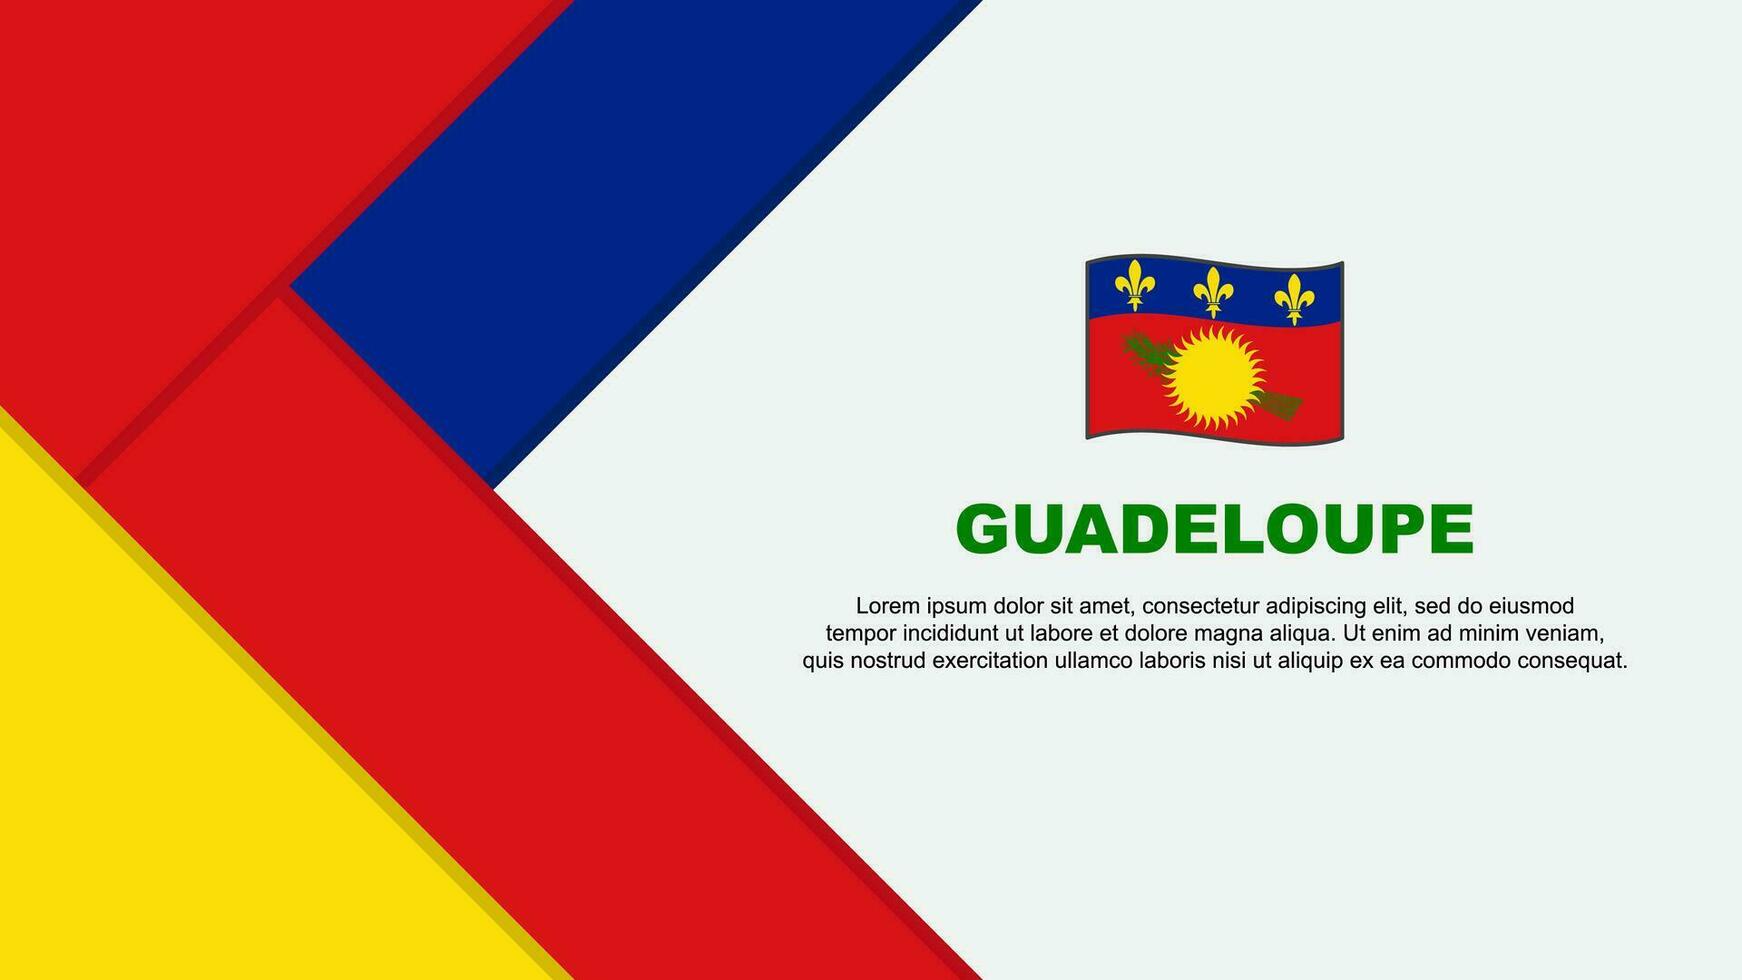 Guadeloupe Flag Abstract Background Design Template. Guadeloupe Independence Day Banner Cartoon Vector Illustration. Guadeloupe Illustration